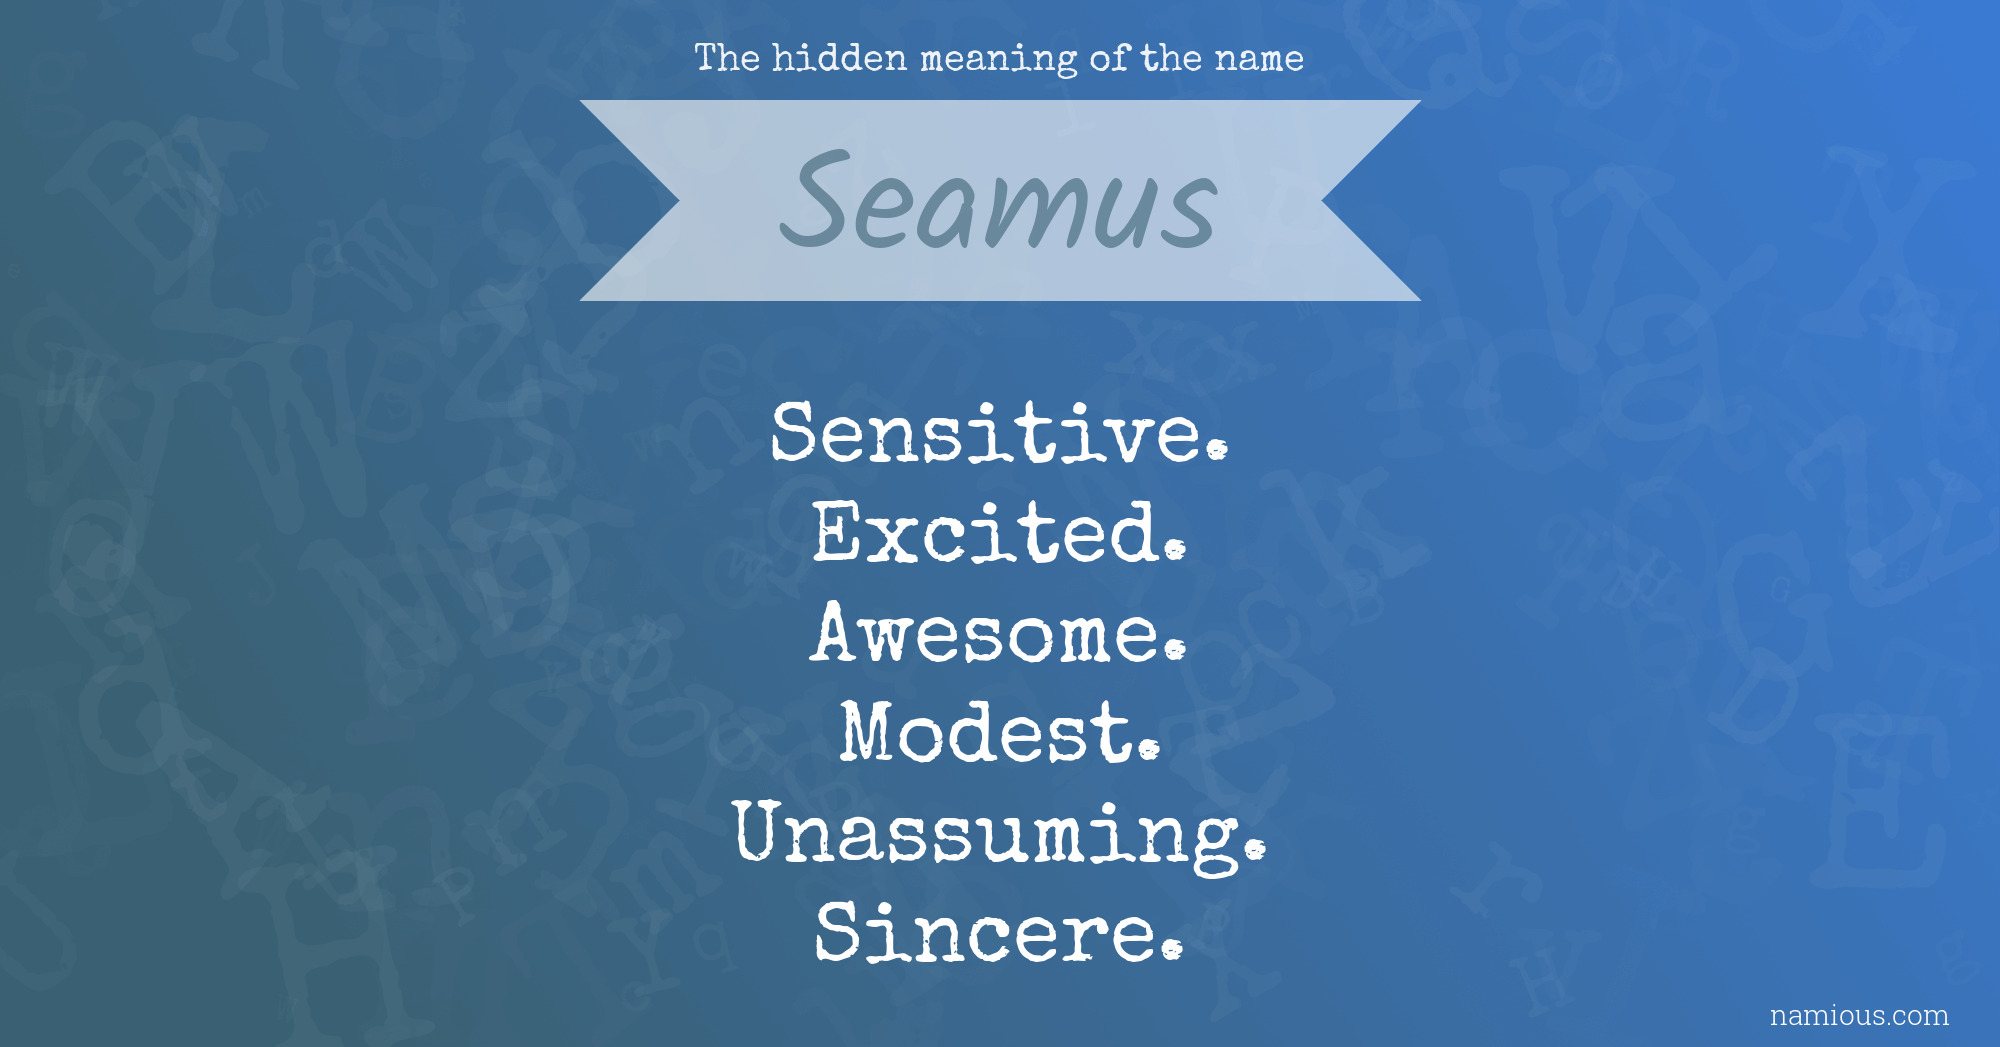 The hidden meaning of the name Seamus